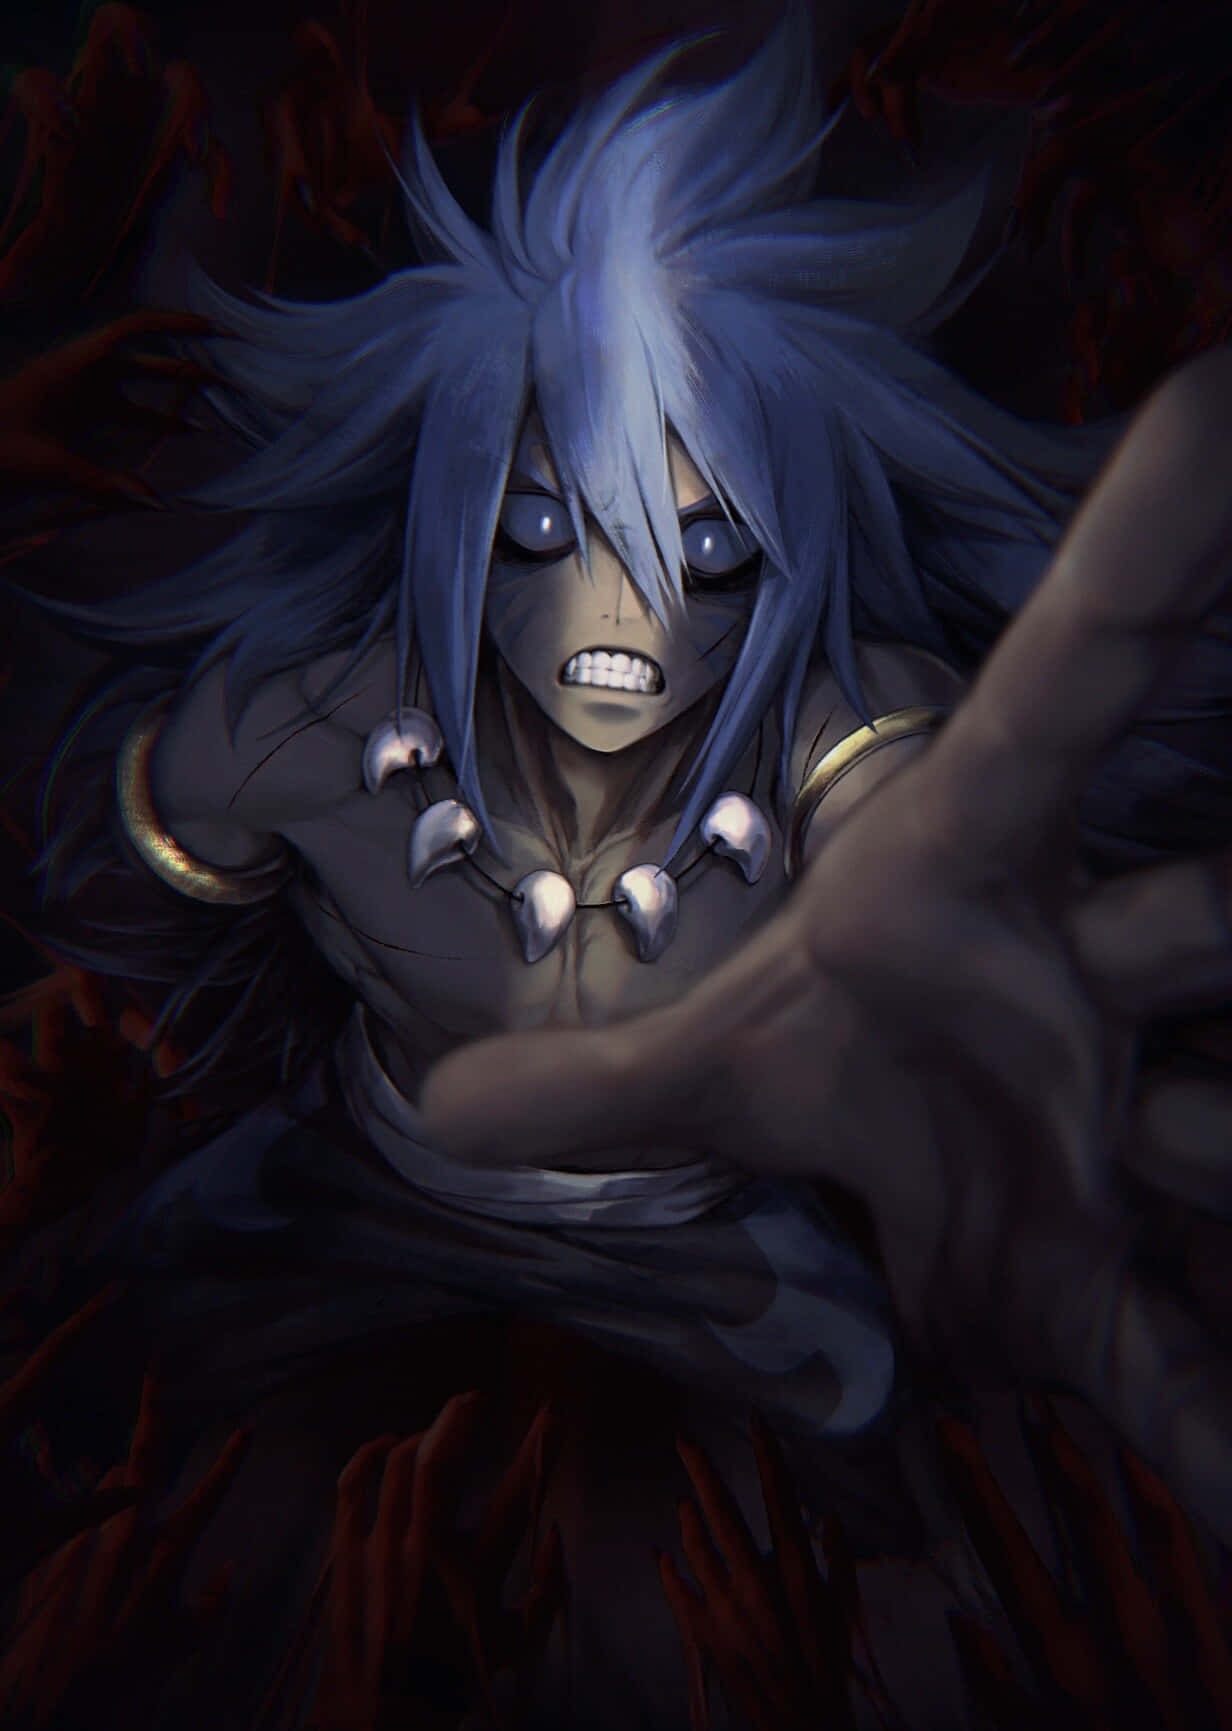 Acnologia, the Dragon of Apocalypse in High Resolution Wallpaper Wallpaper